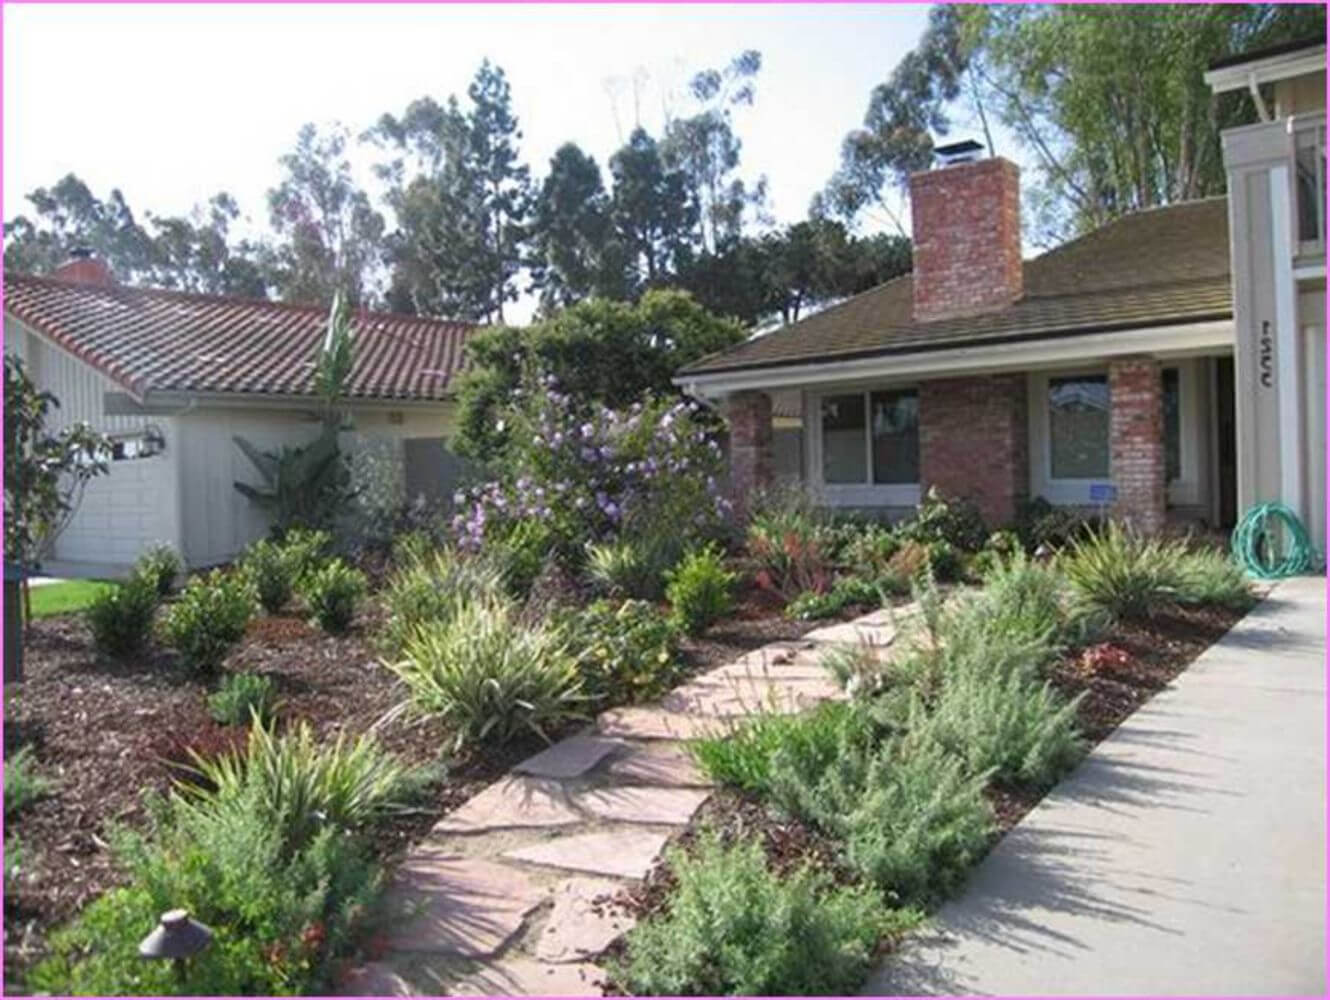 Landscaping Design Ideas Without Grass, How To Landscape A Front Yard Without Grass